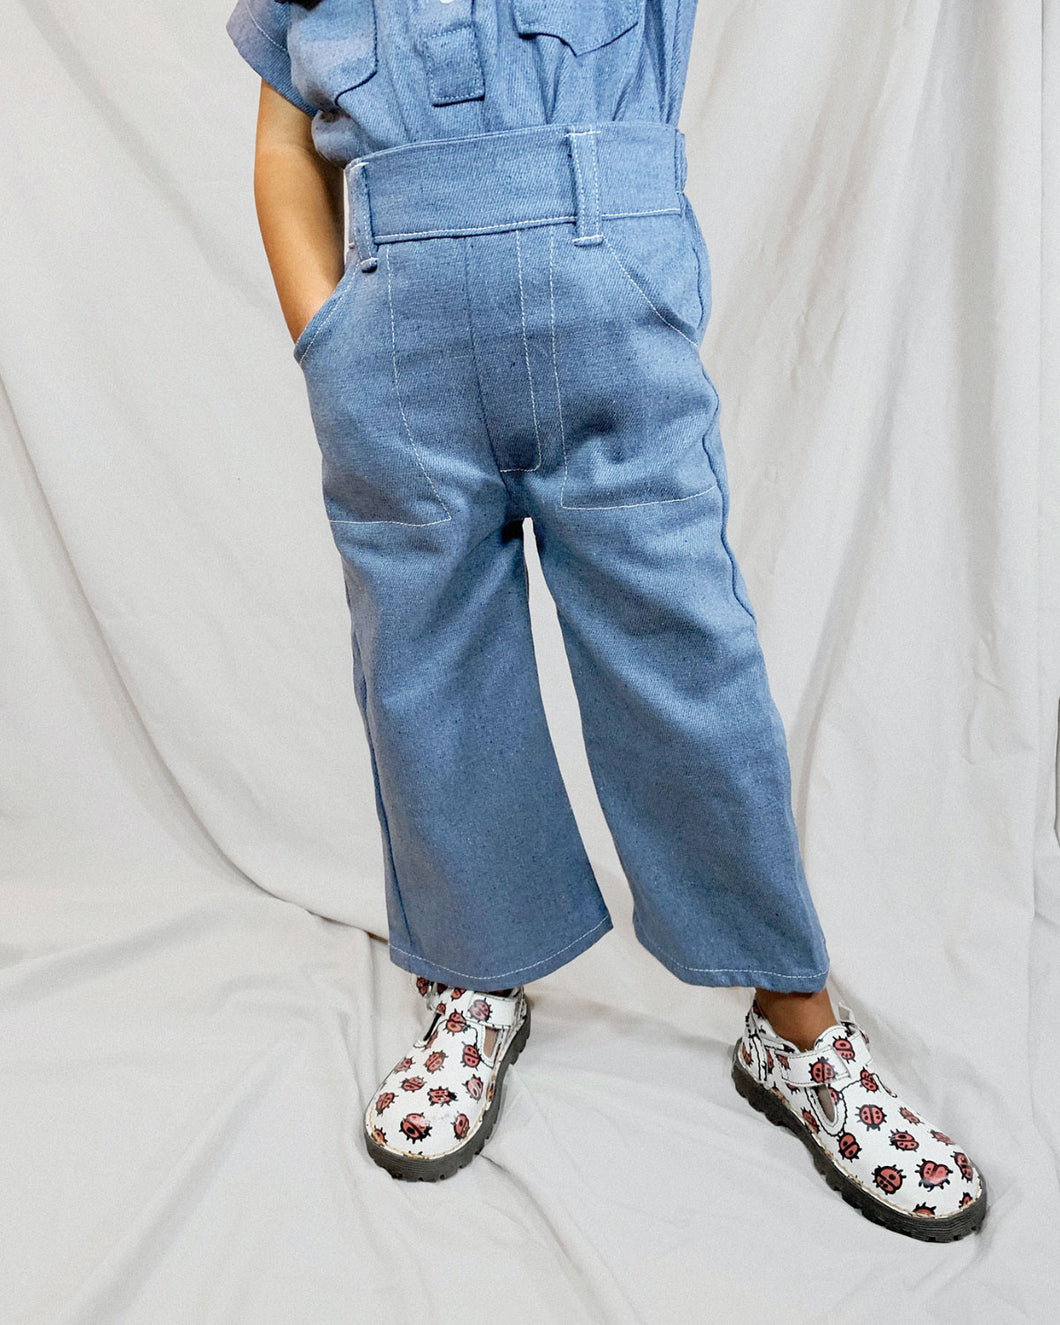 High waisted denim pants for toddlers and kids. Two pockets 